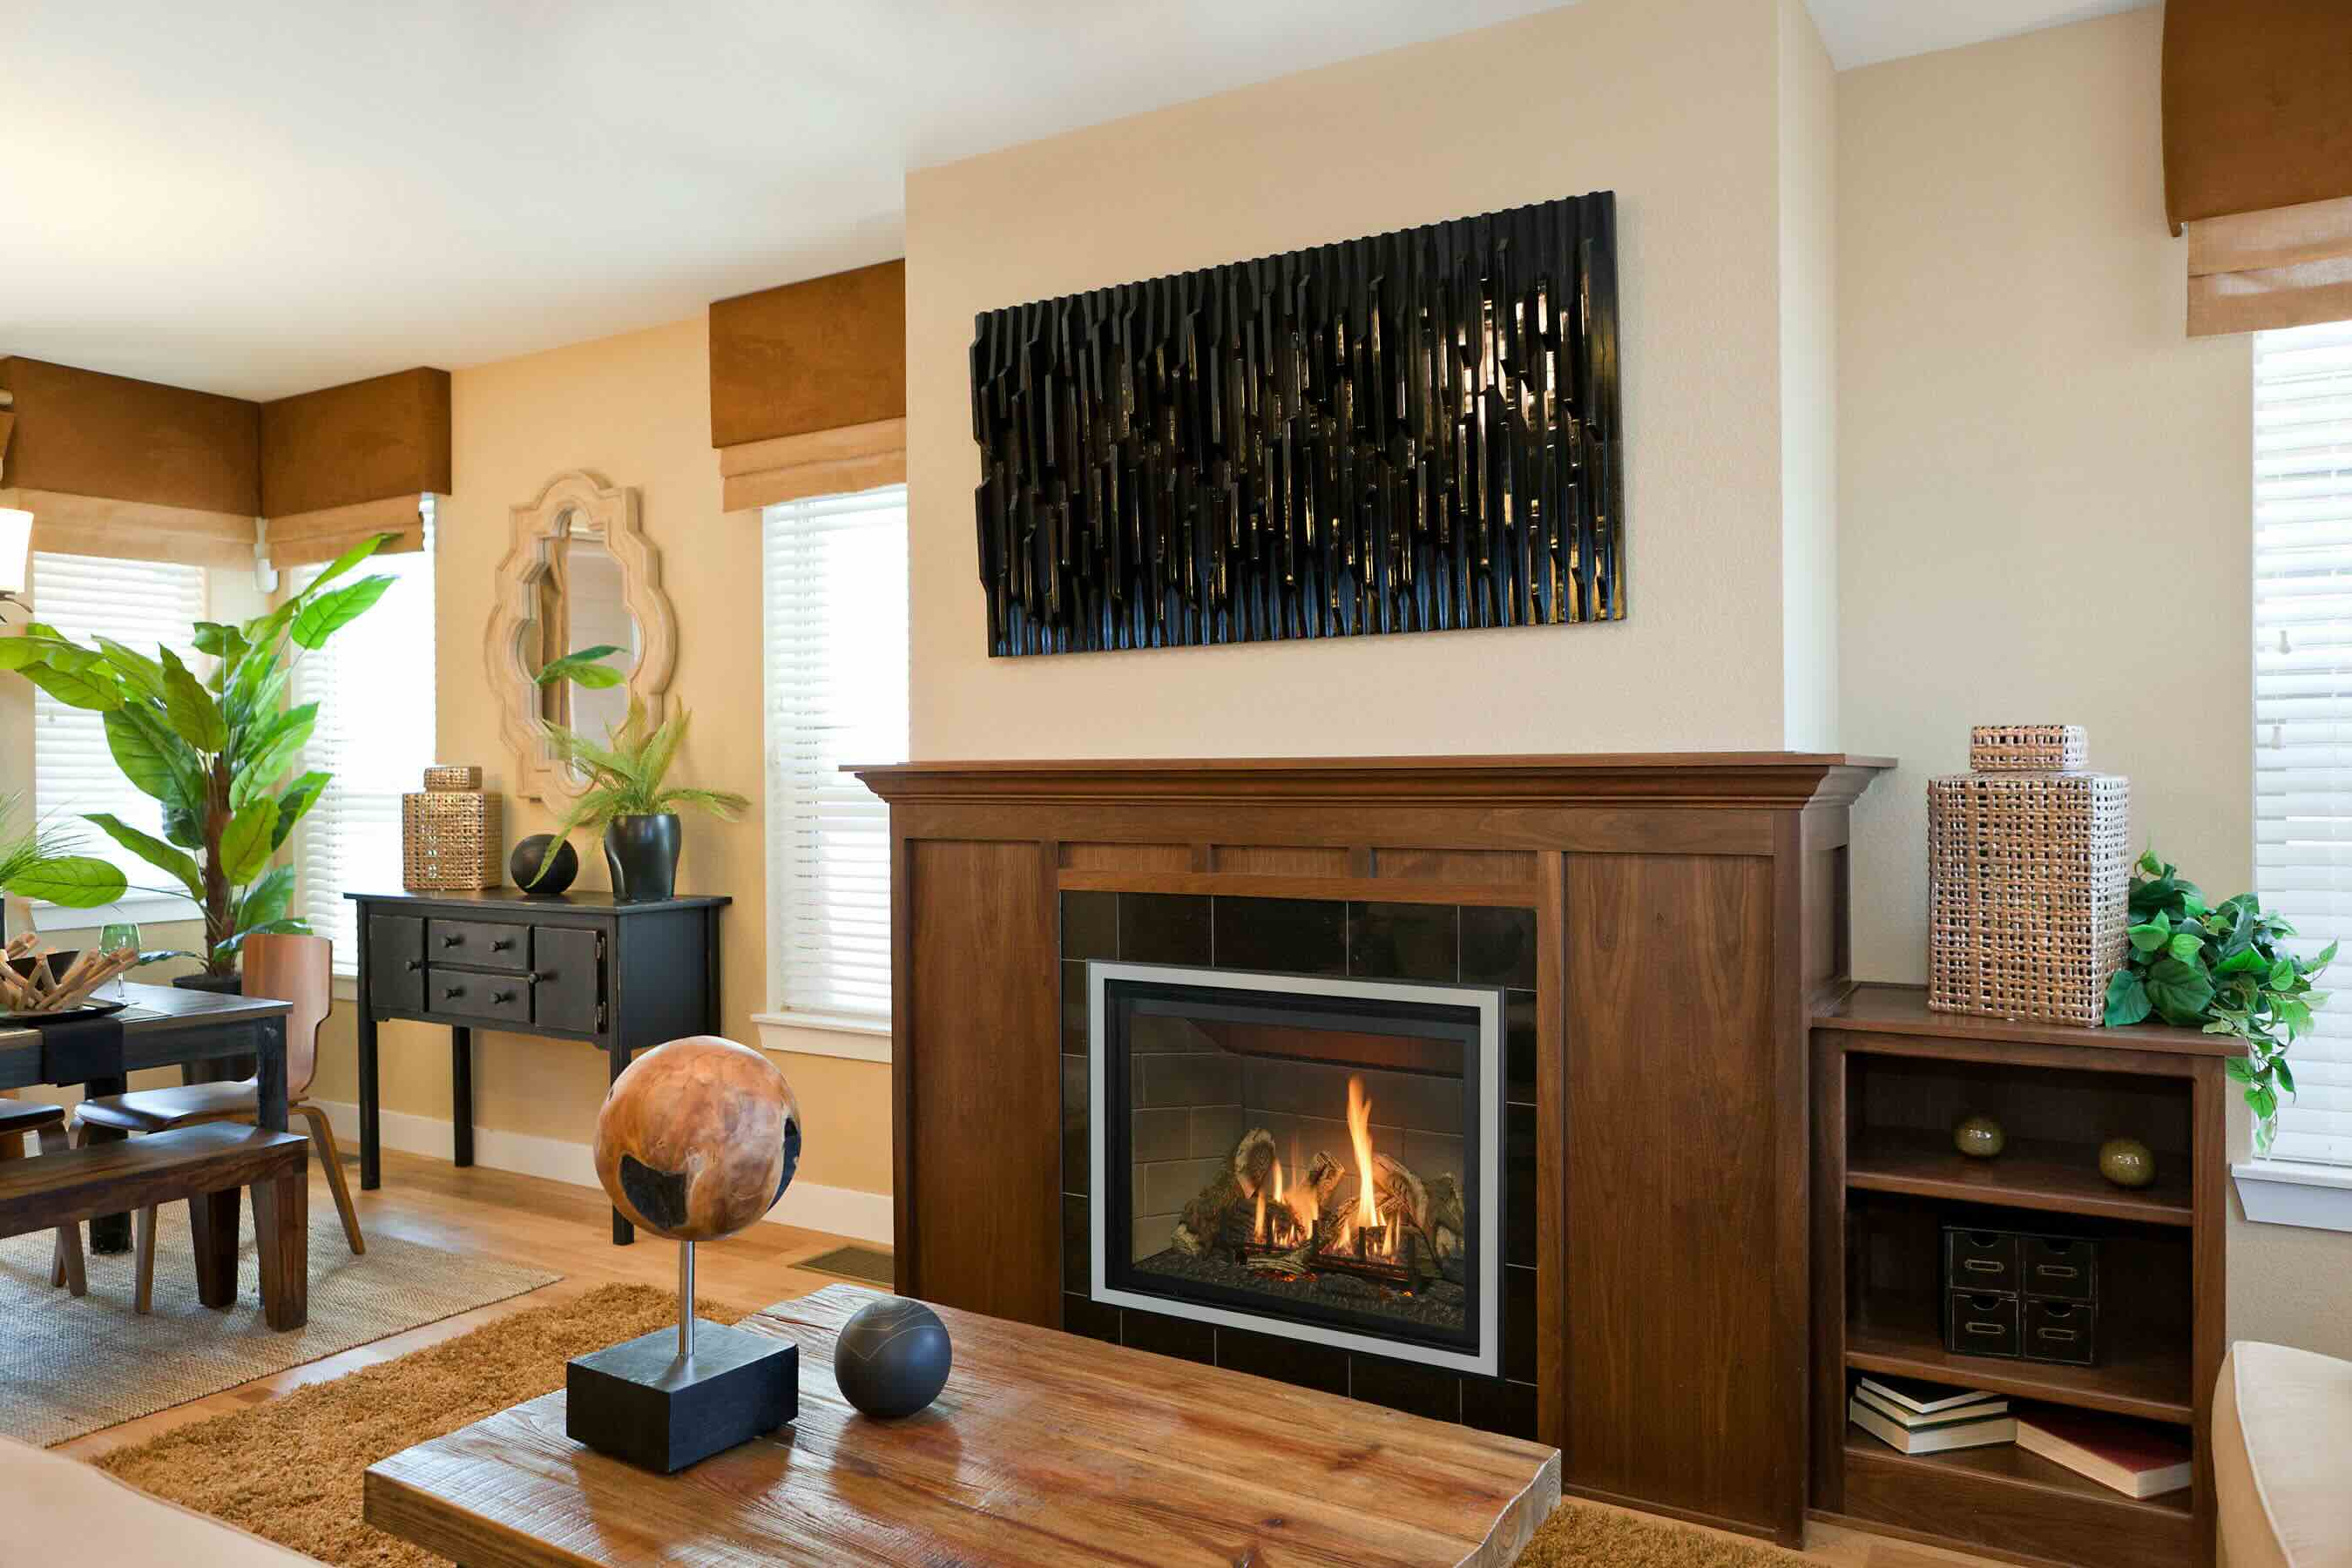 How To Install A Gas Fireplace Ventilation System